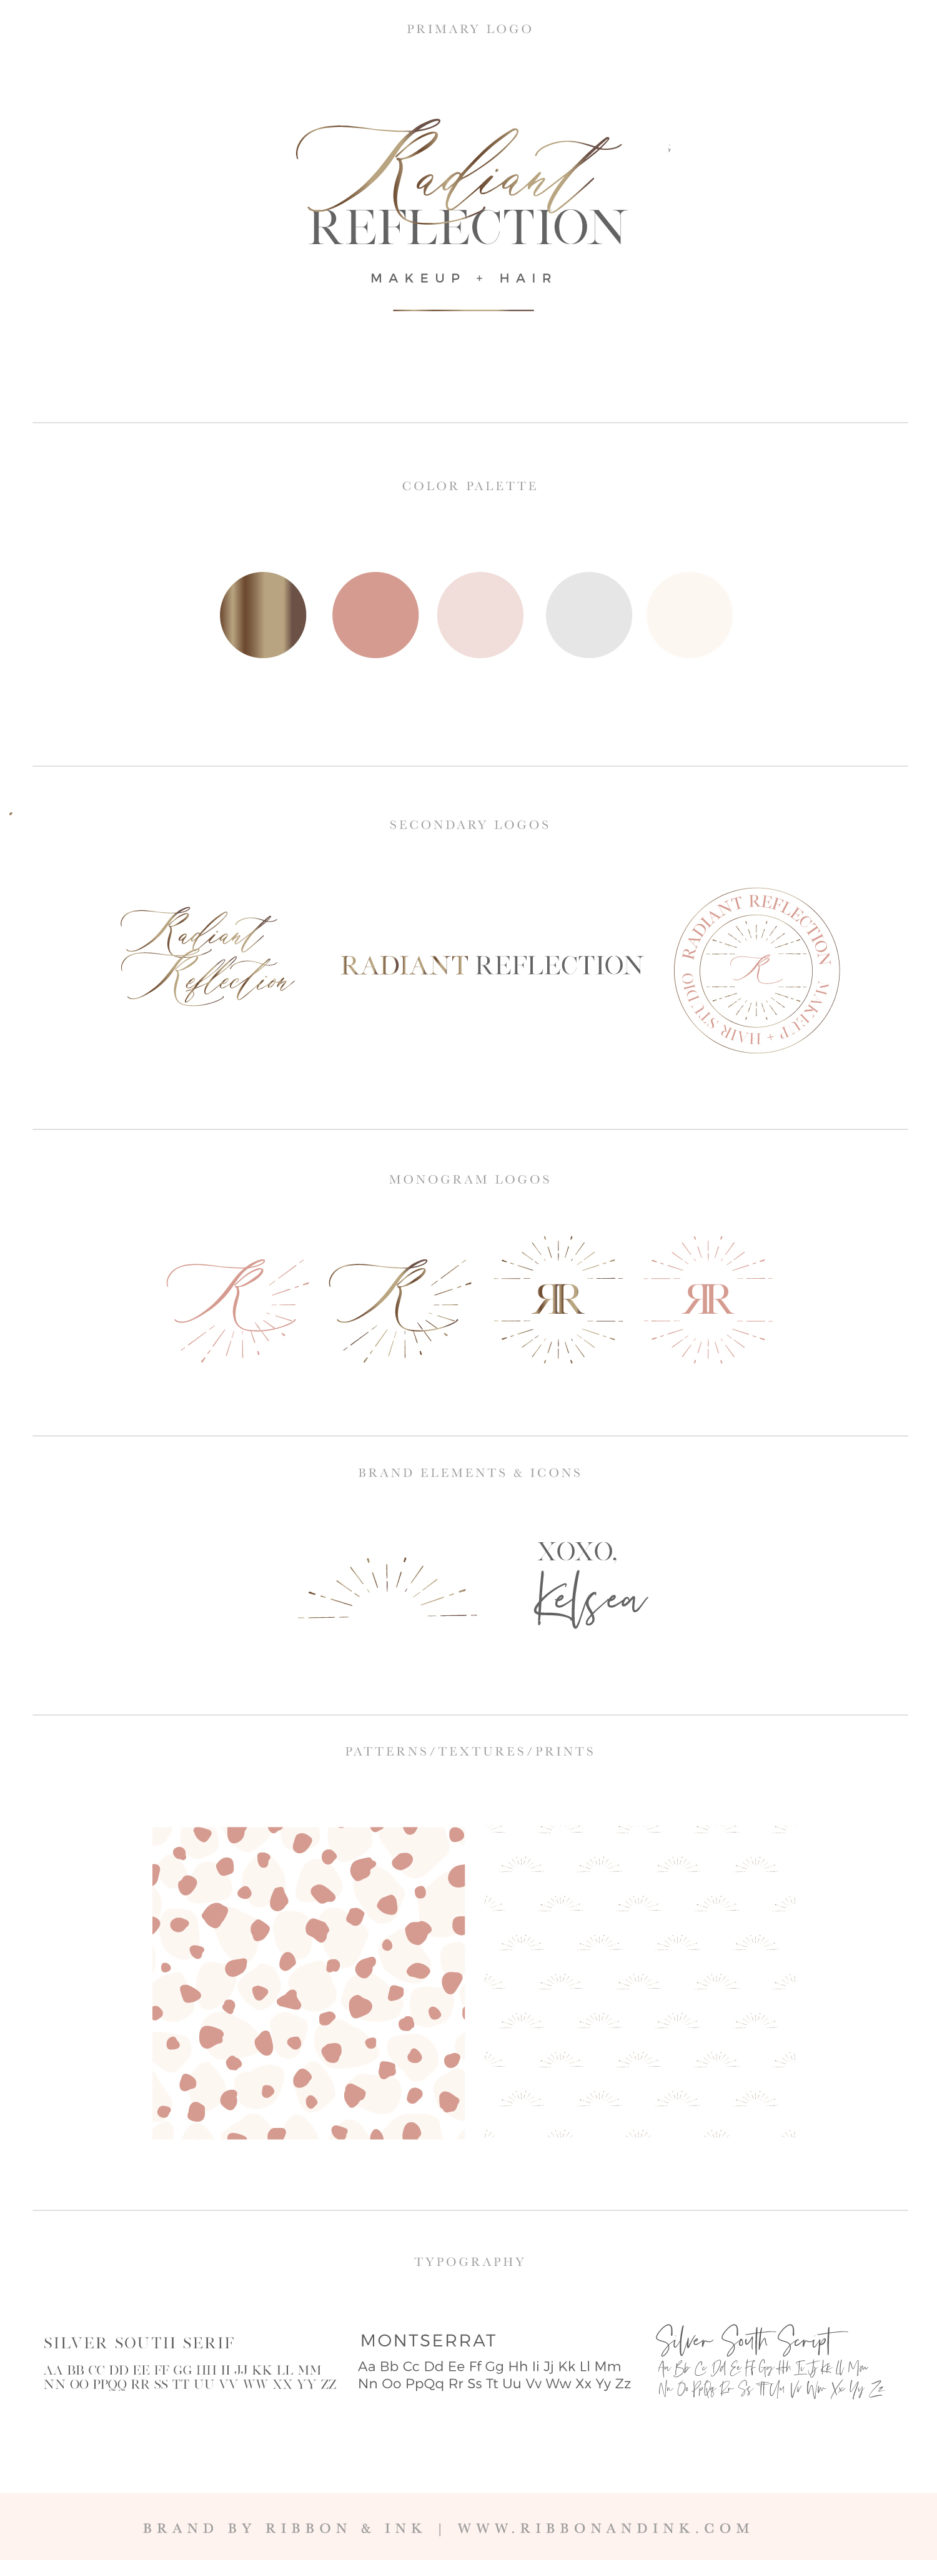 branding for wedding professionals , businesses, creatives / logo concepts / makeup artist / hair / gold / modern/ high end / luxury